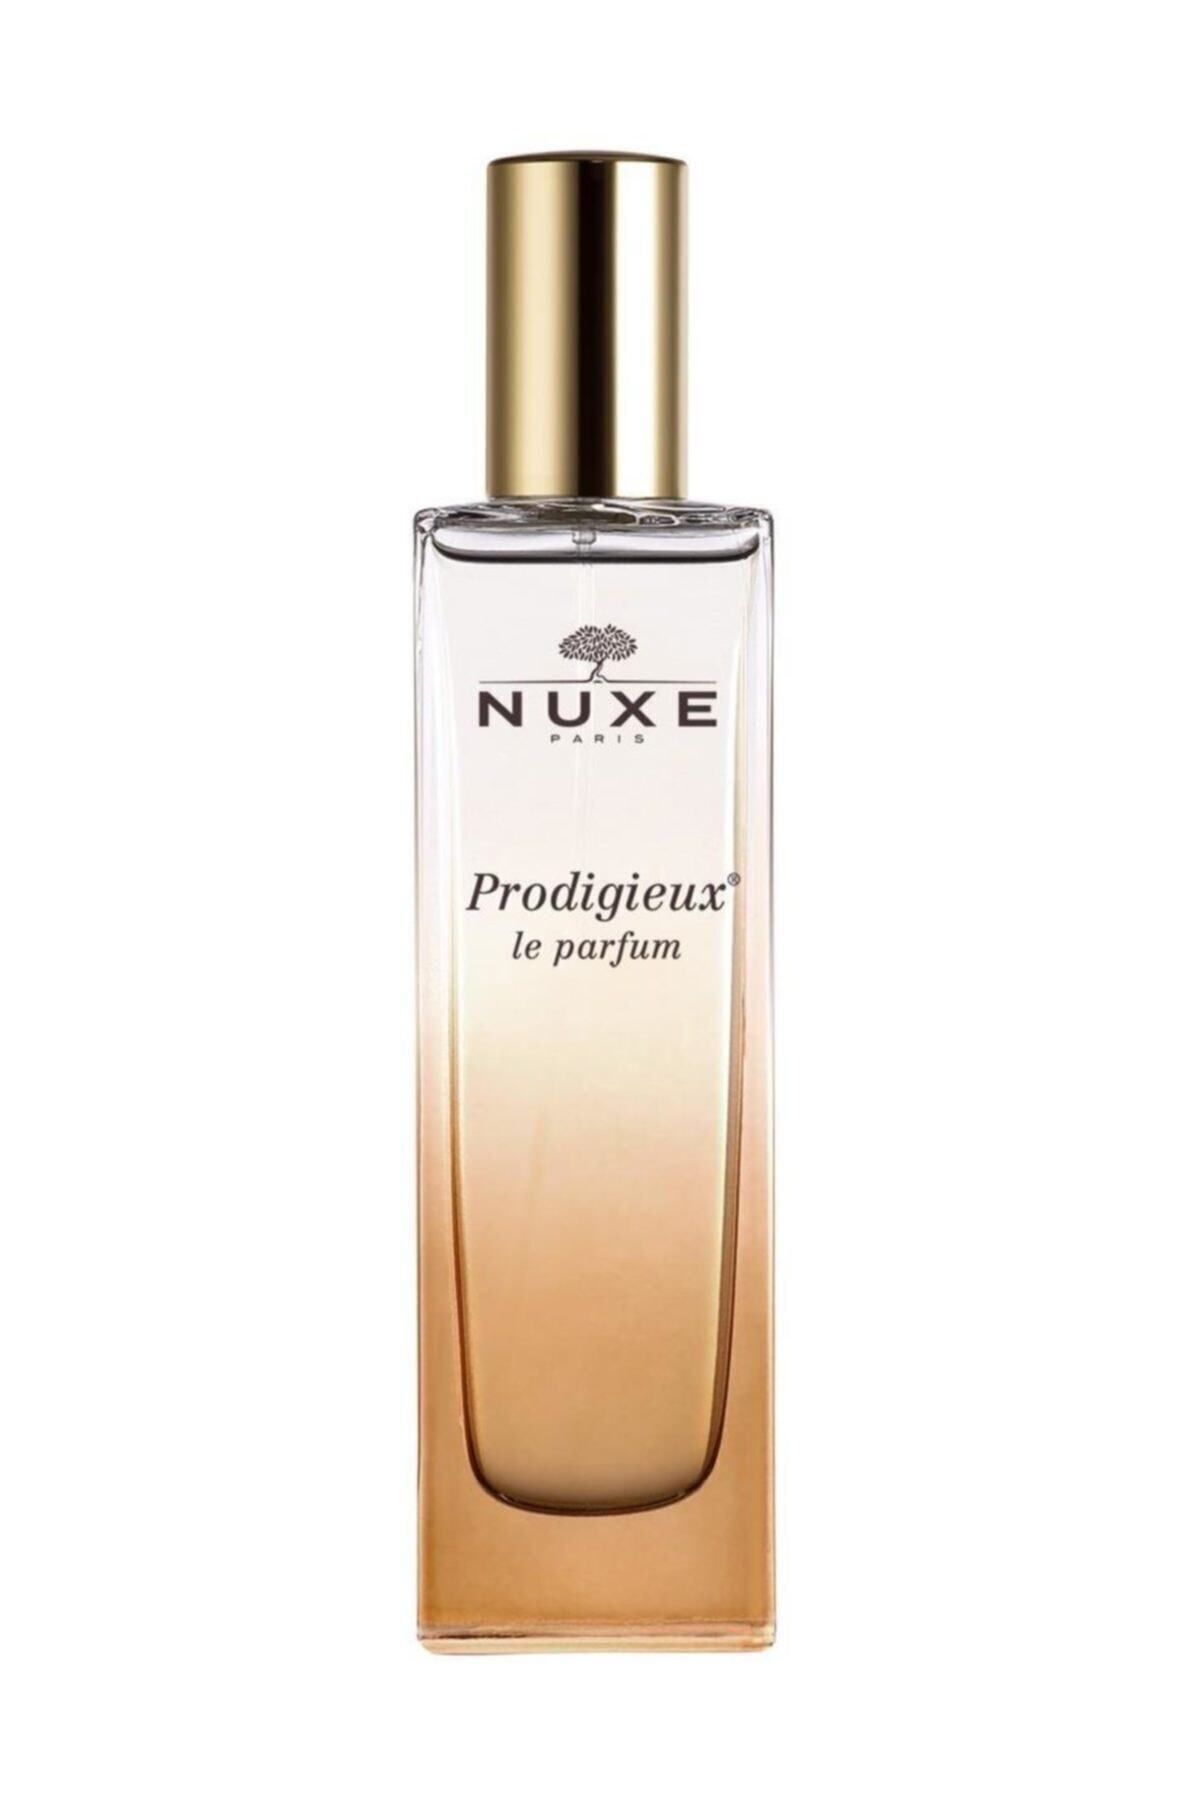 Nuxe NATURAL FLOWER SCENTED EDP INTENSE ESSENCE WOMEN'S PERFUME 50 ML DEMBA1204